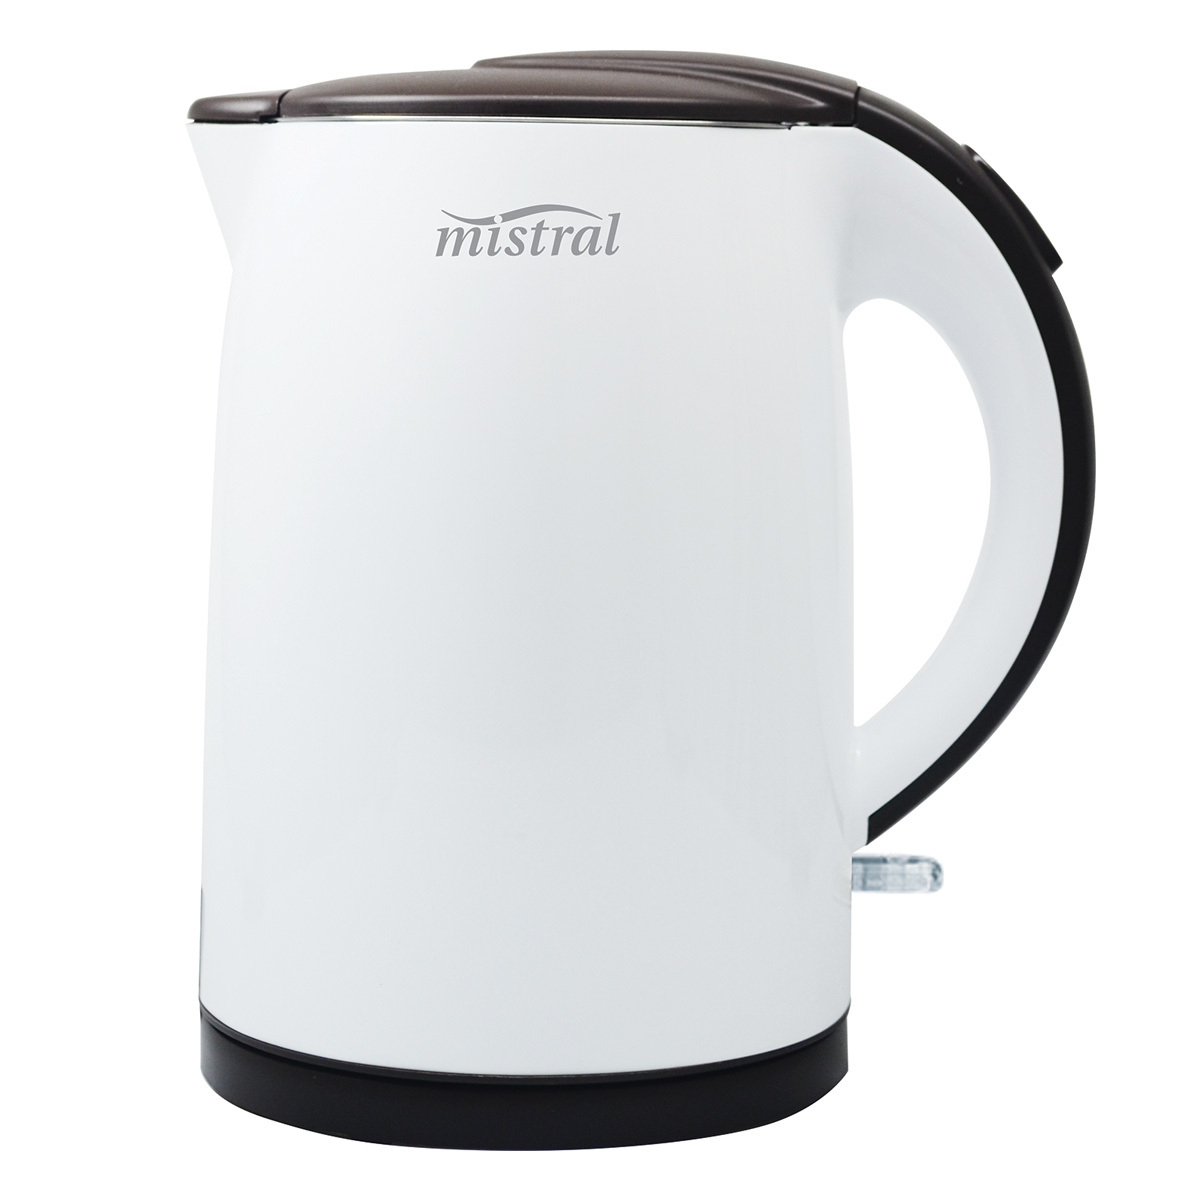 mayer electric kettle review